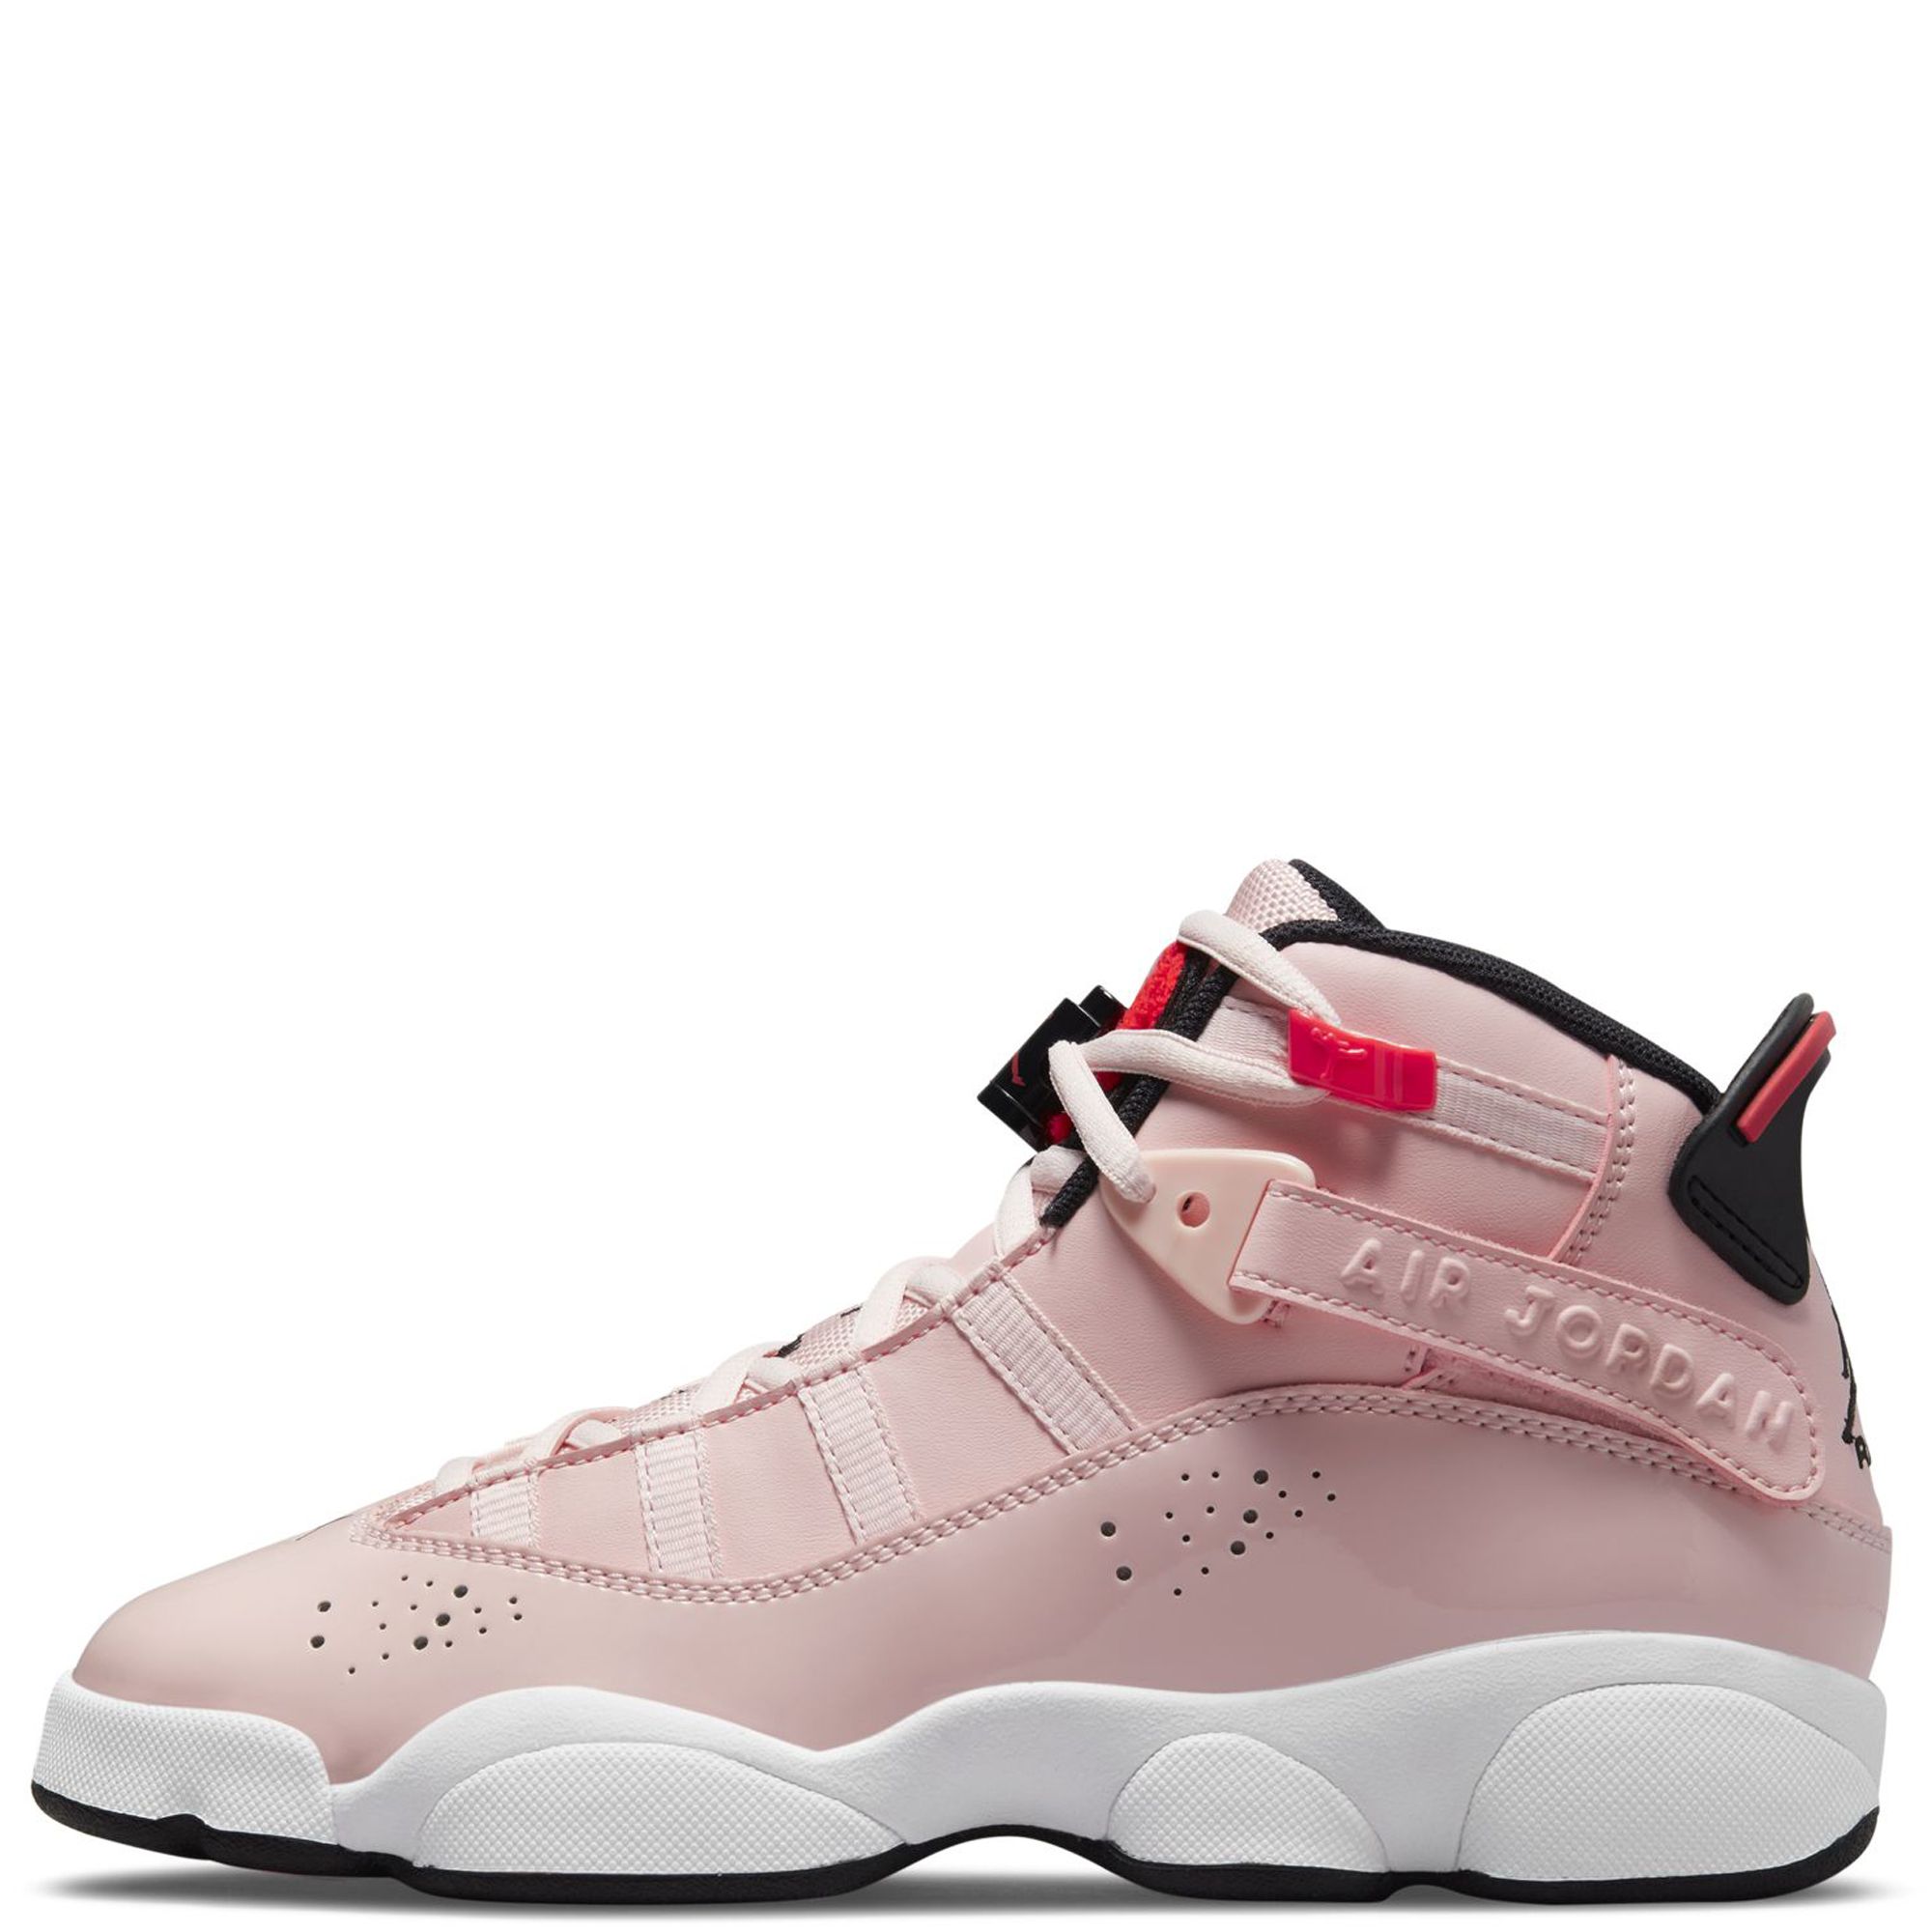 A general view of the pink Adidas basketball sneakers worn by